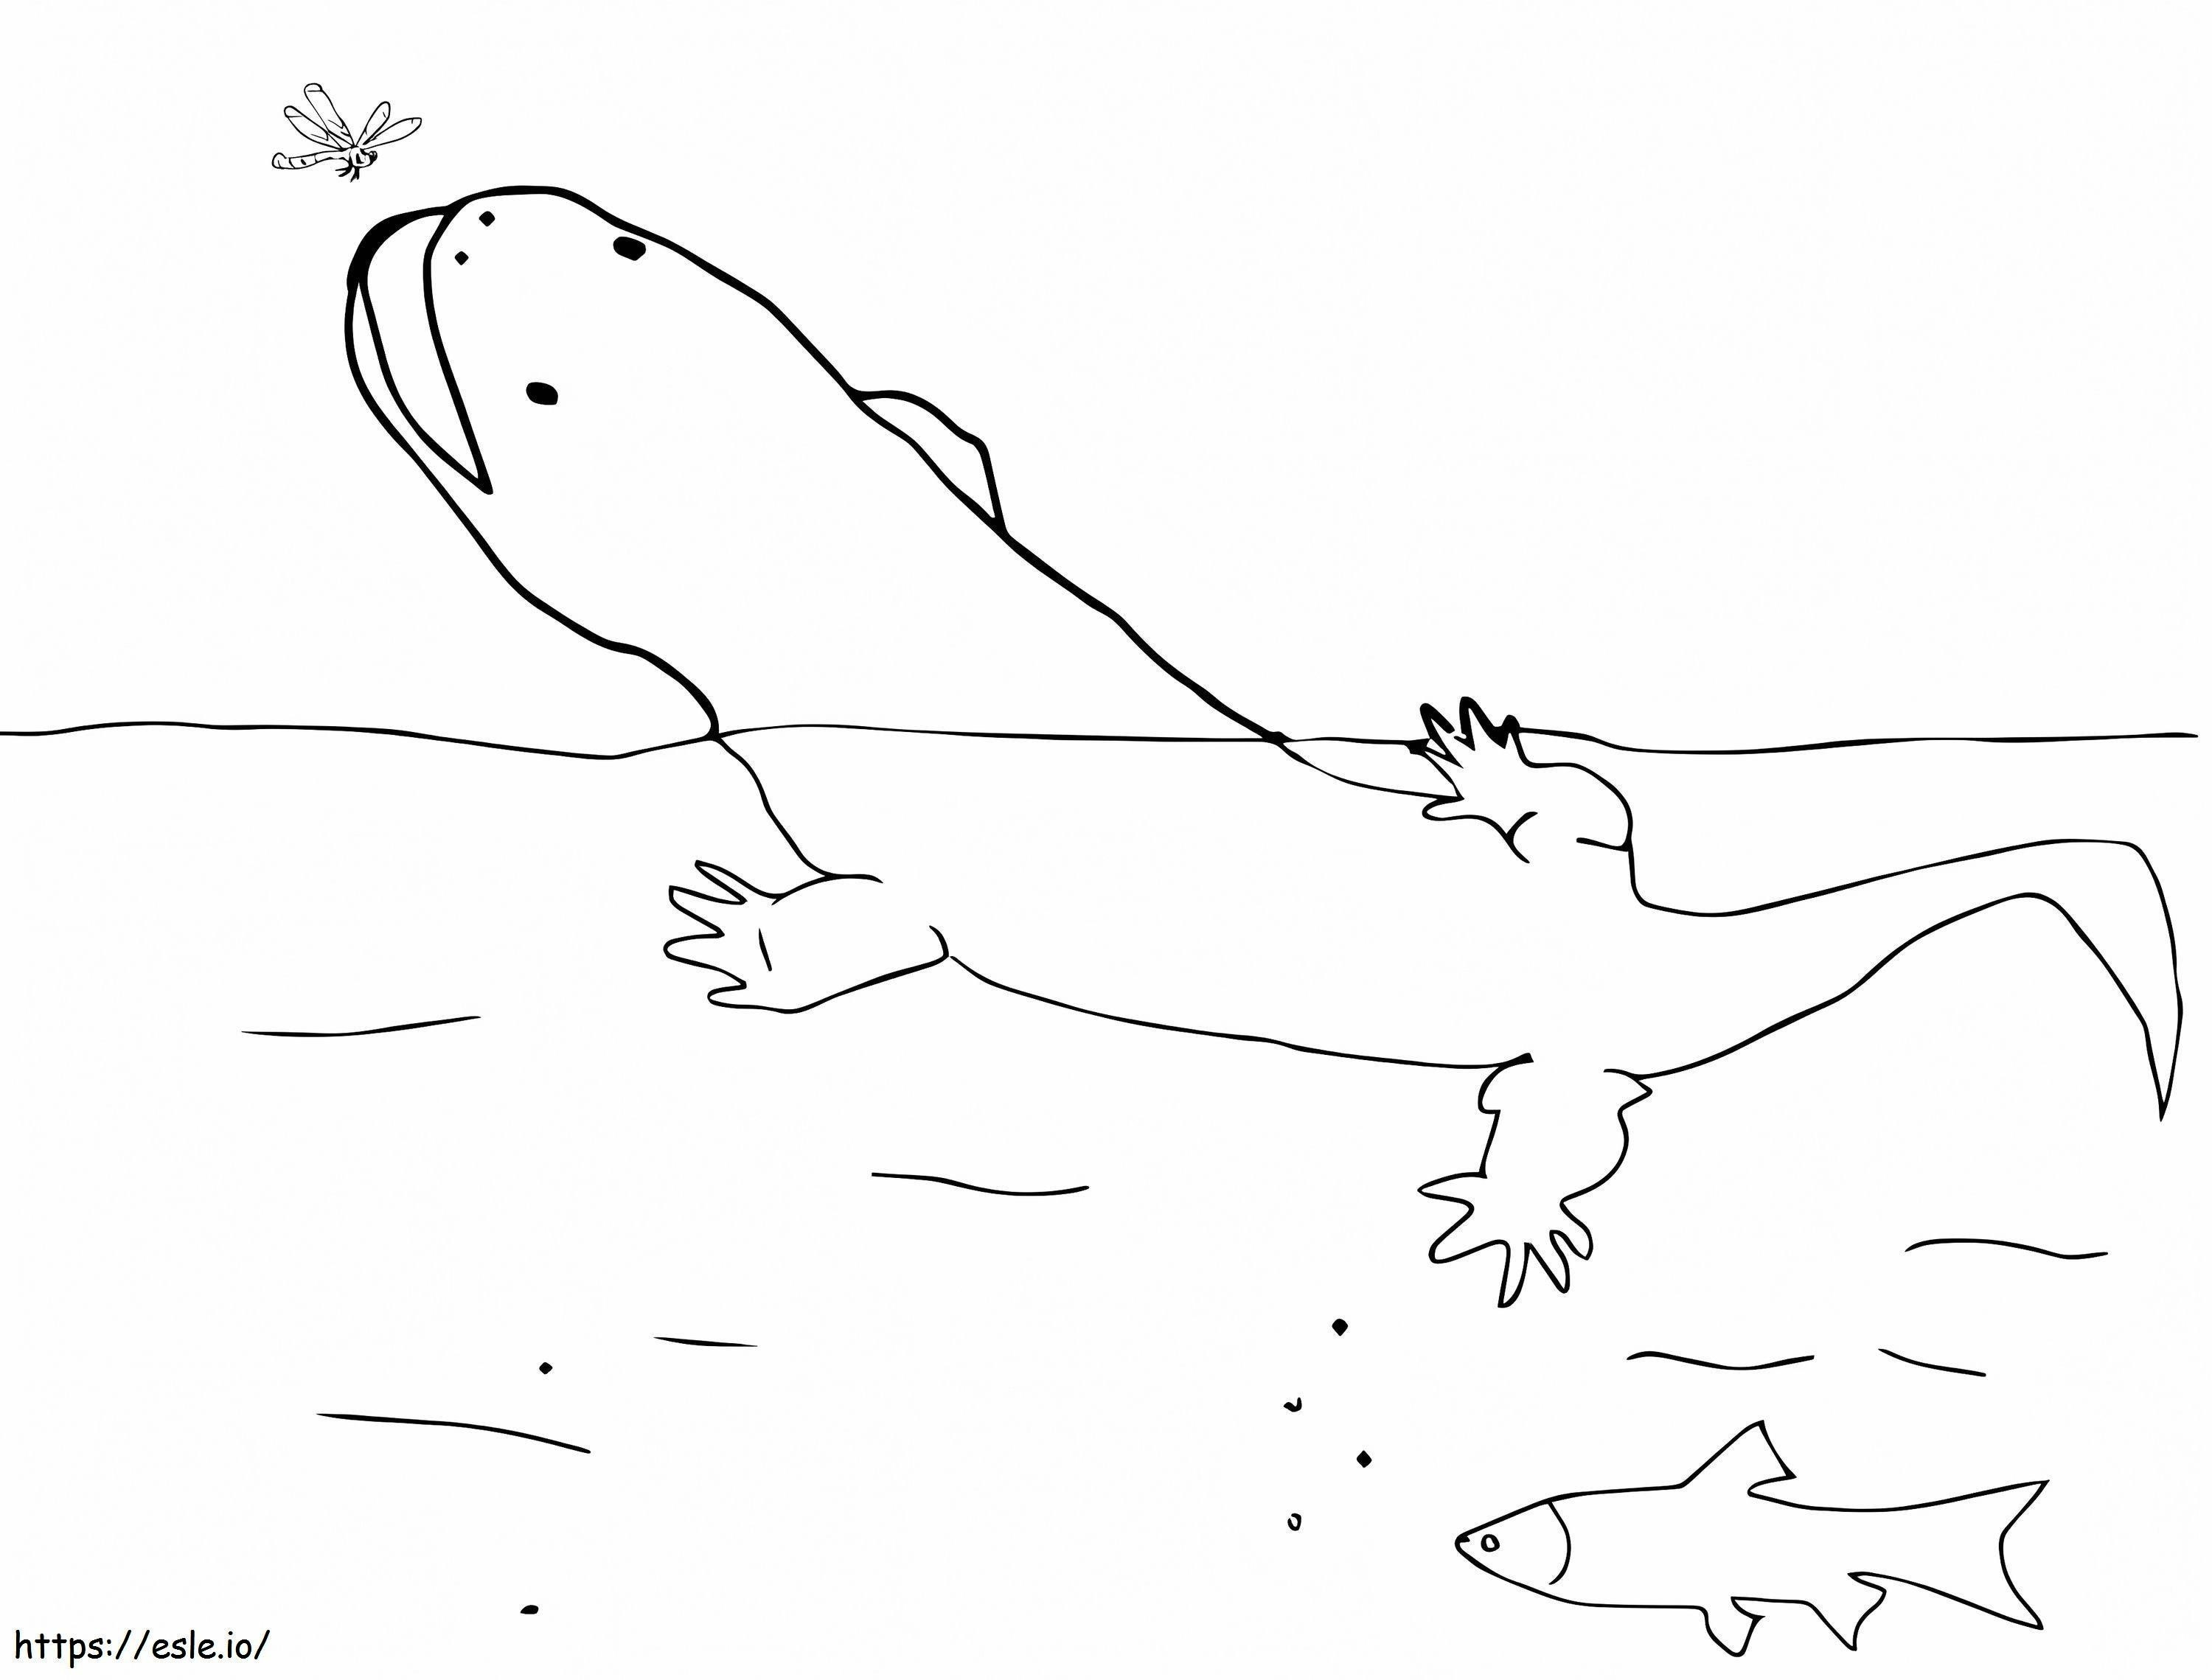 Chinese Giant Salamander coloring page